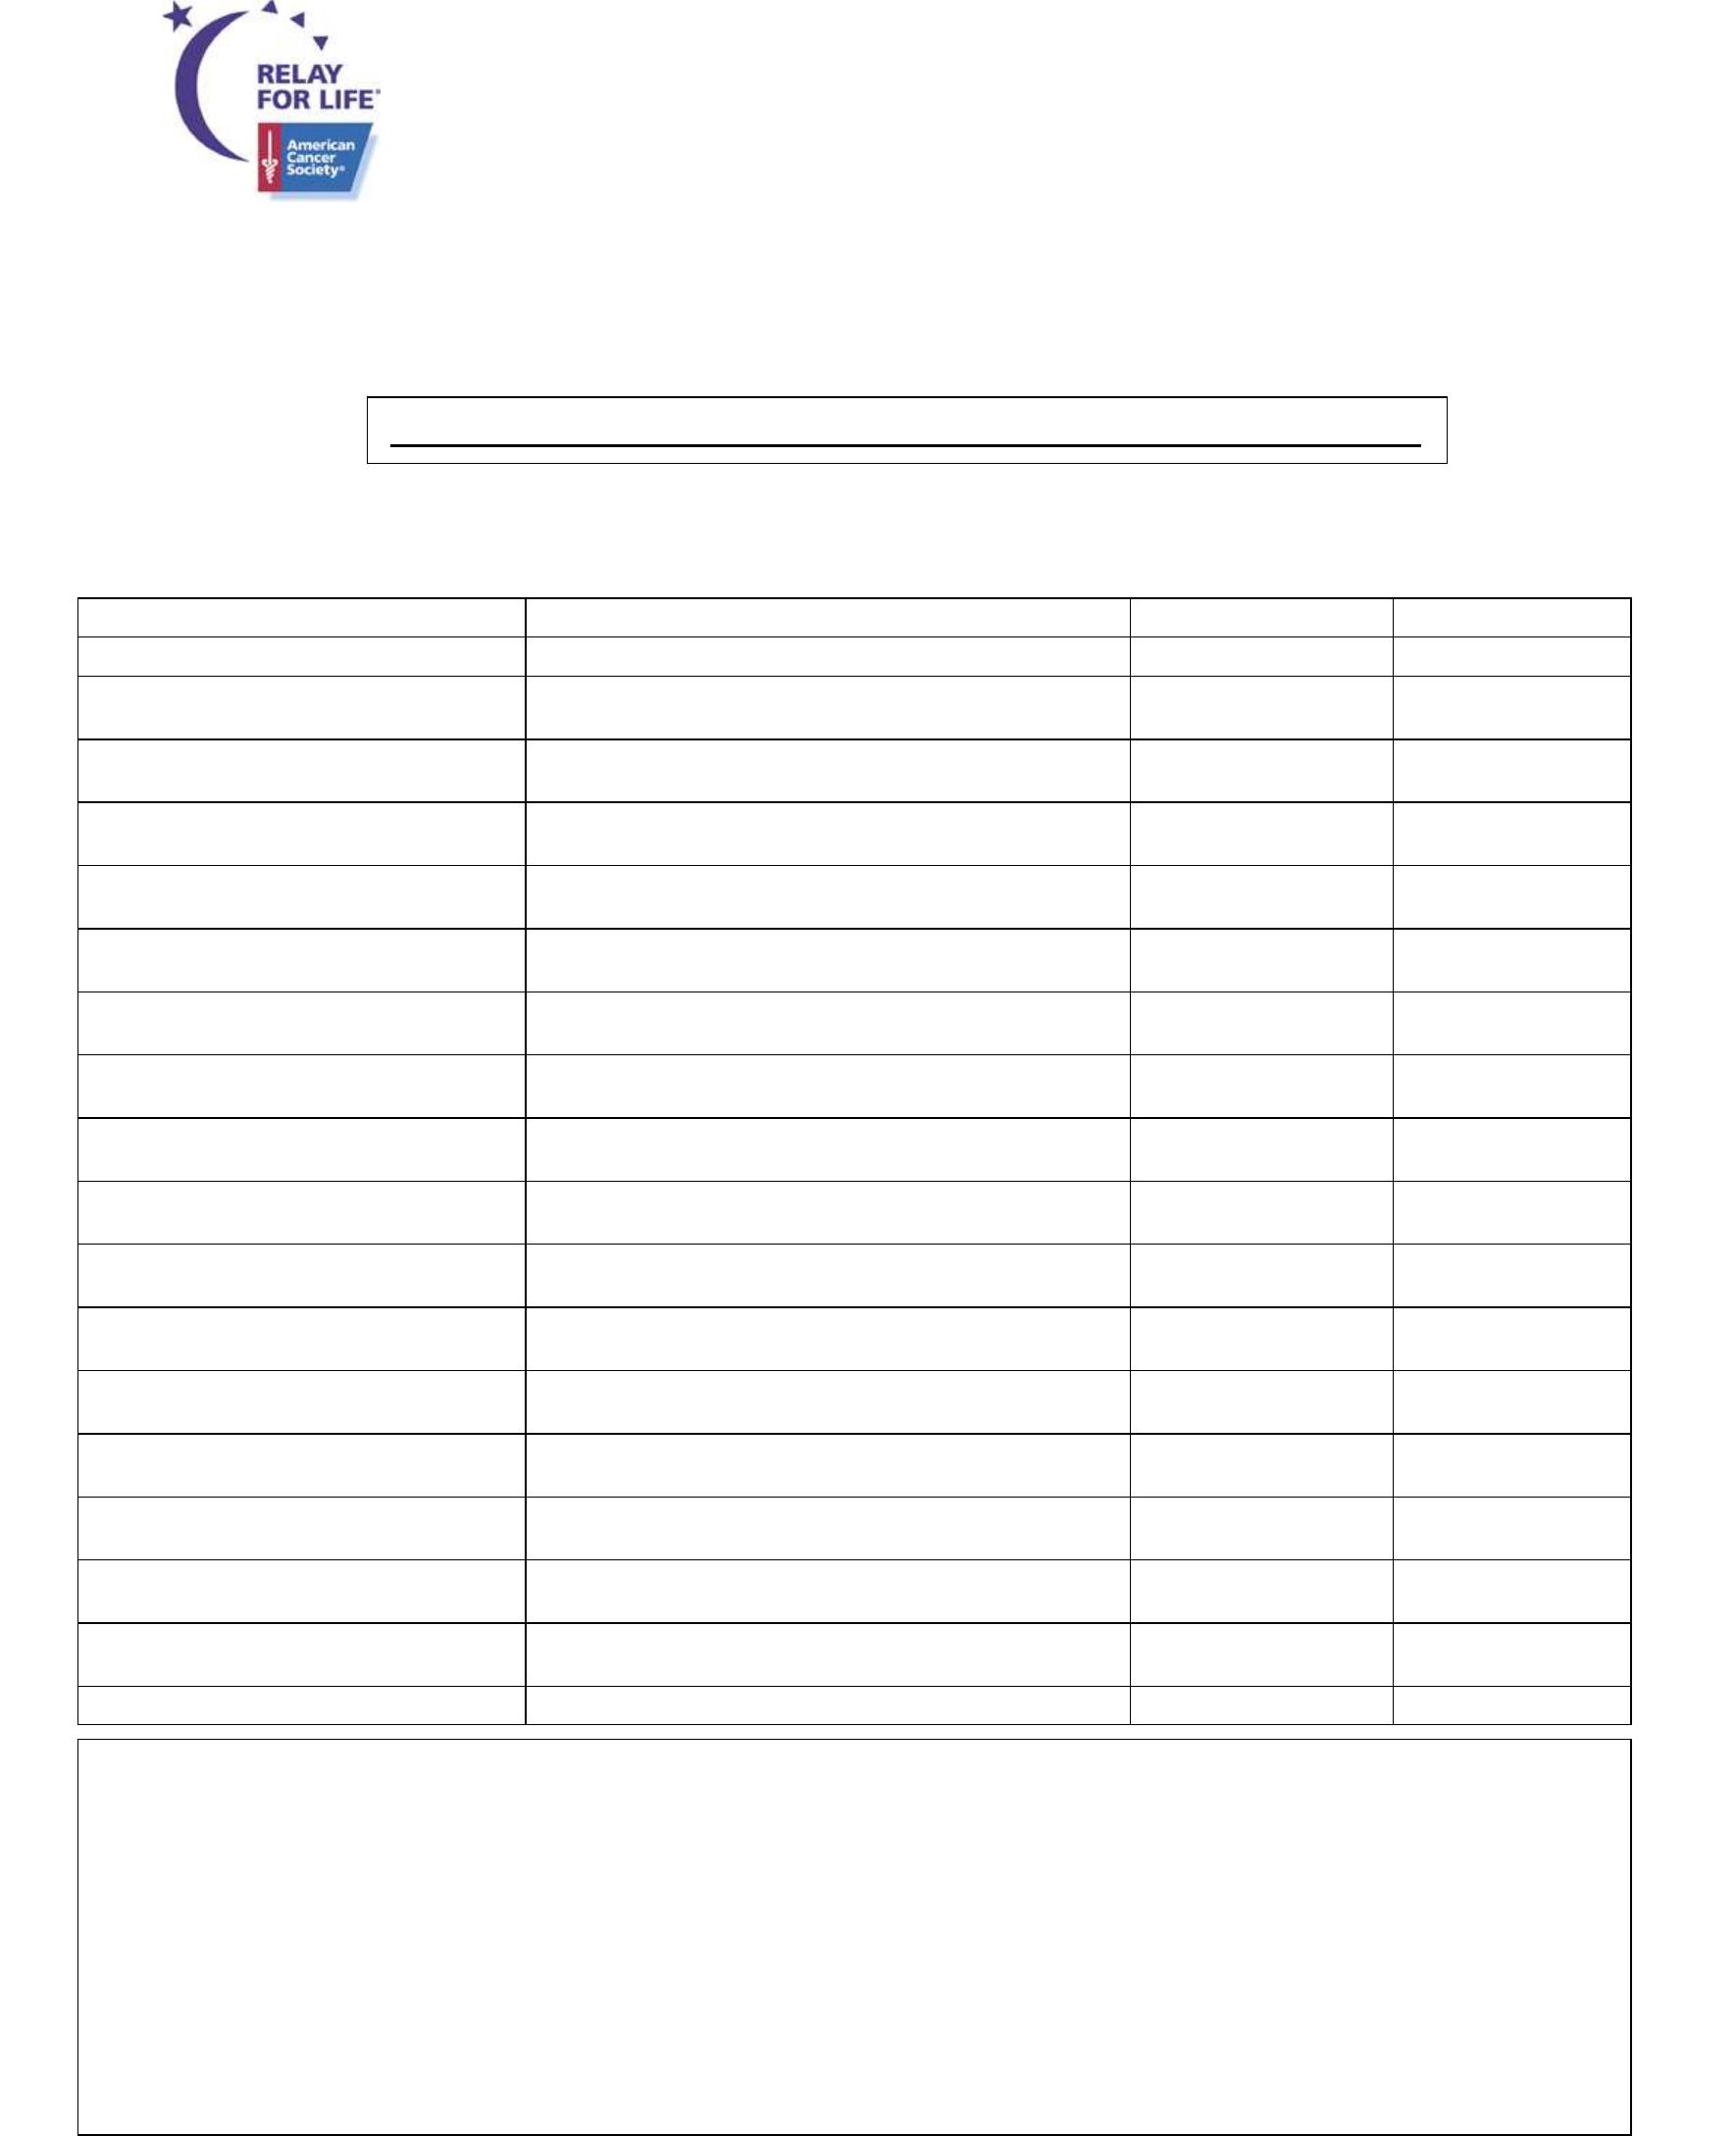 Relay For Life Donation Form – America Free Download For Blank Sponsorship Form Template